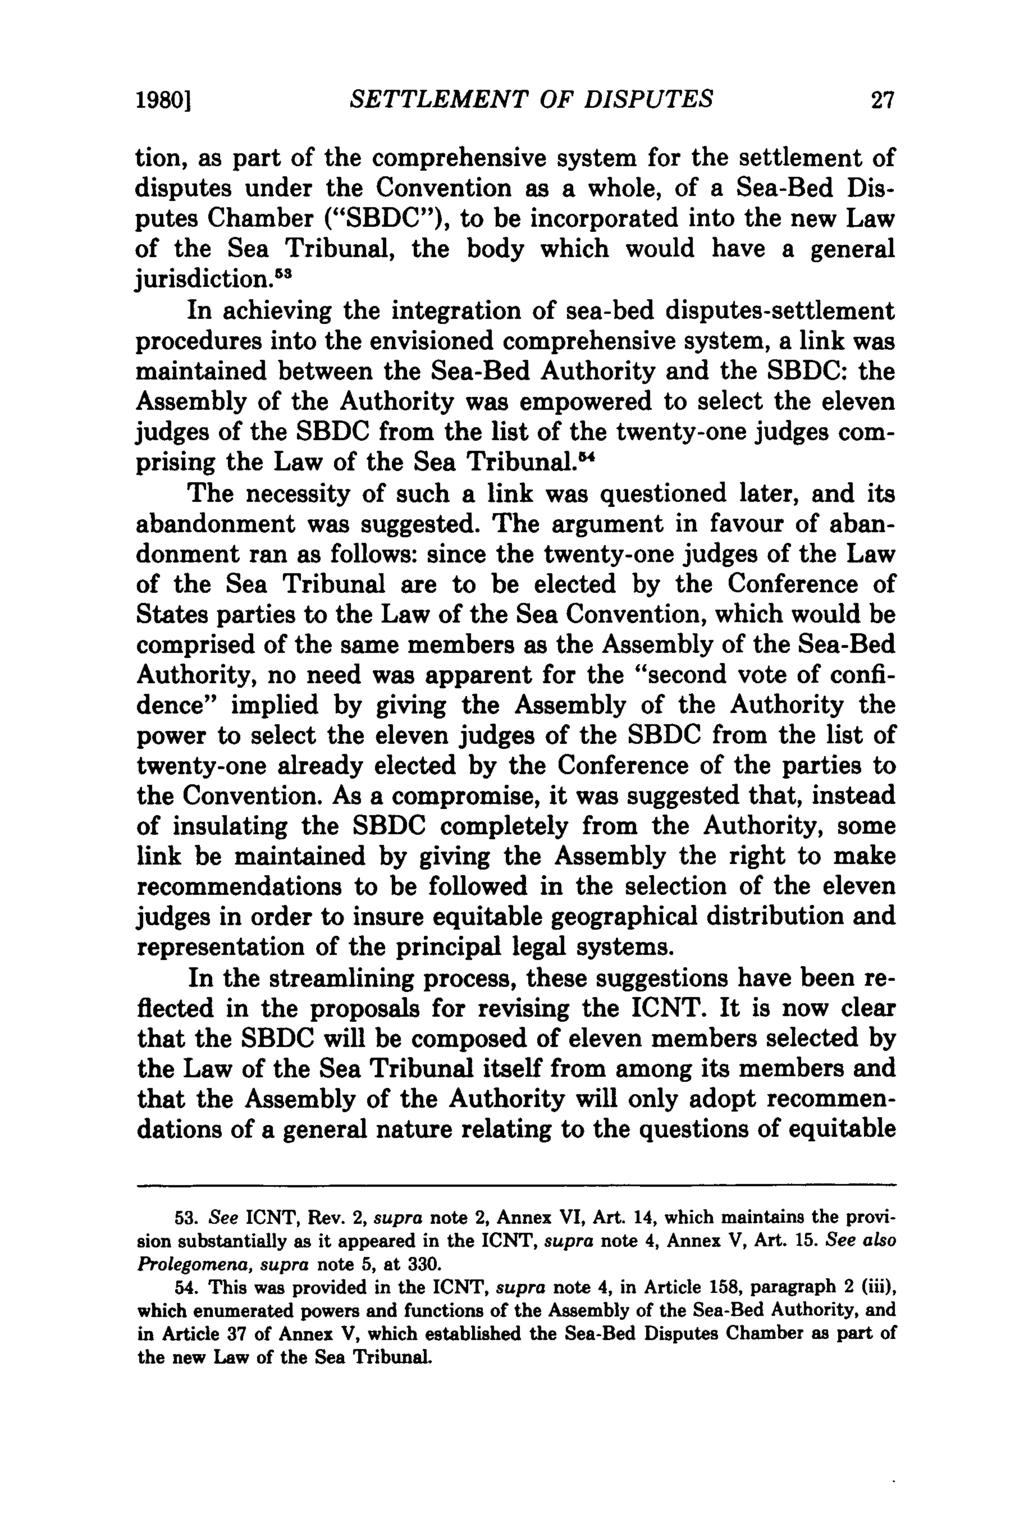 19801 SETTLEMENT OF DISPUTES tion, as part of the comprehensive system for the settlement of disputes under the Convention as a whole, of a Sea-Bed Disputes Chamber ("SBDC"), to be incorporated into